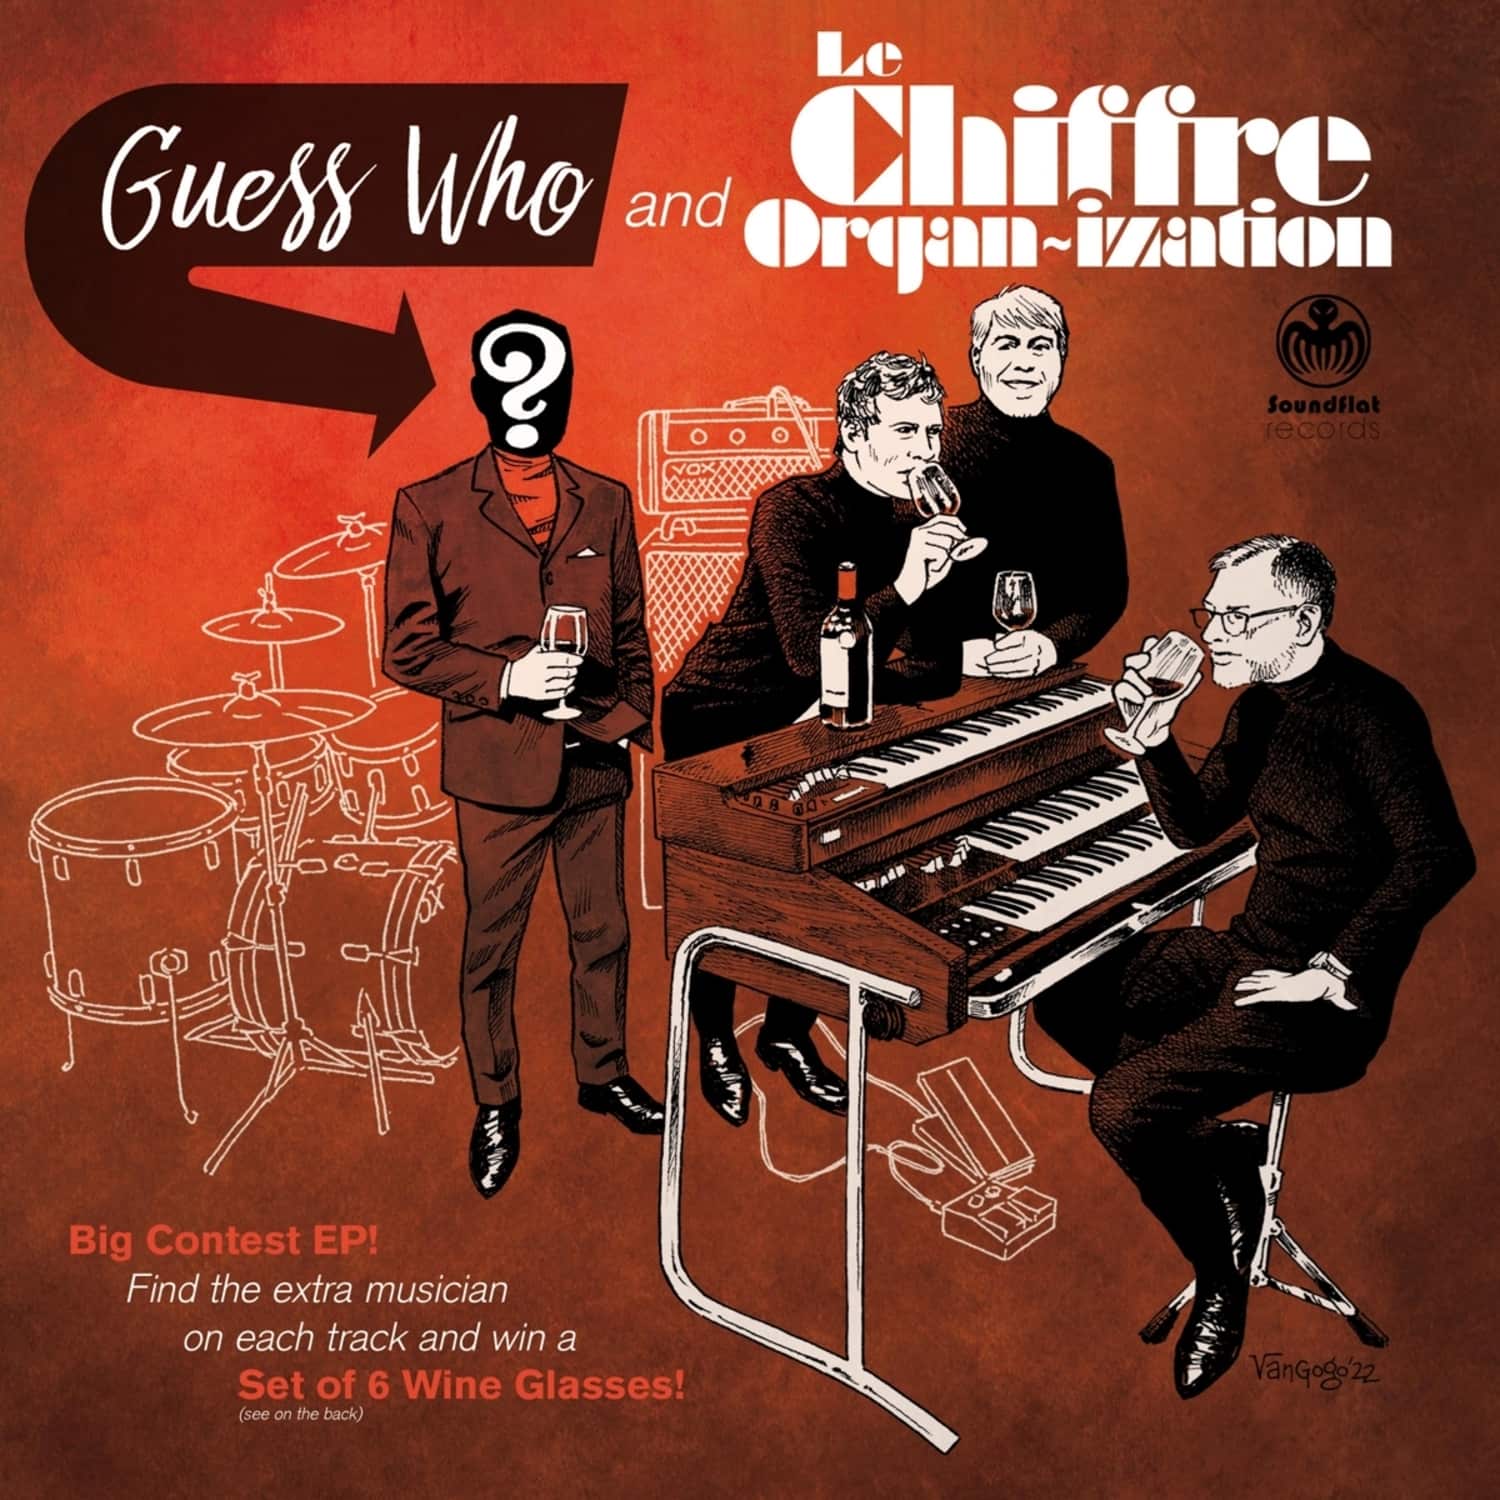 Le Chiffre Organ-Ization - GUESS WHO? EP 